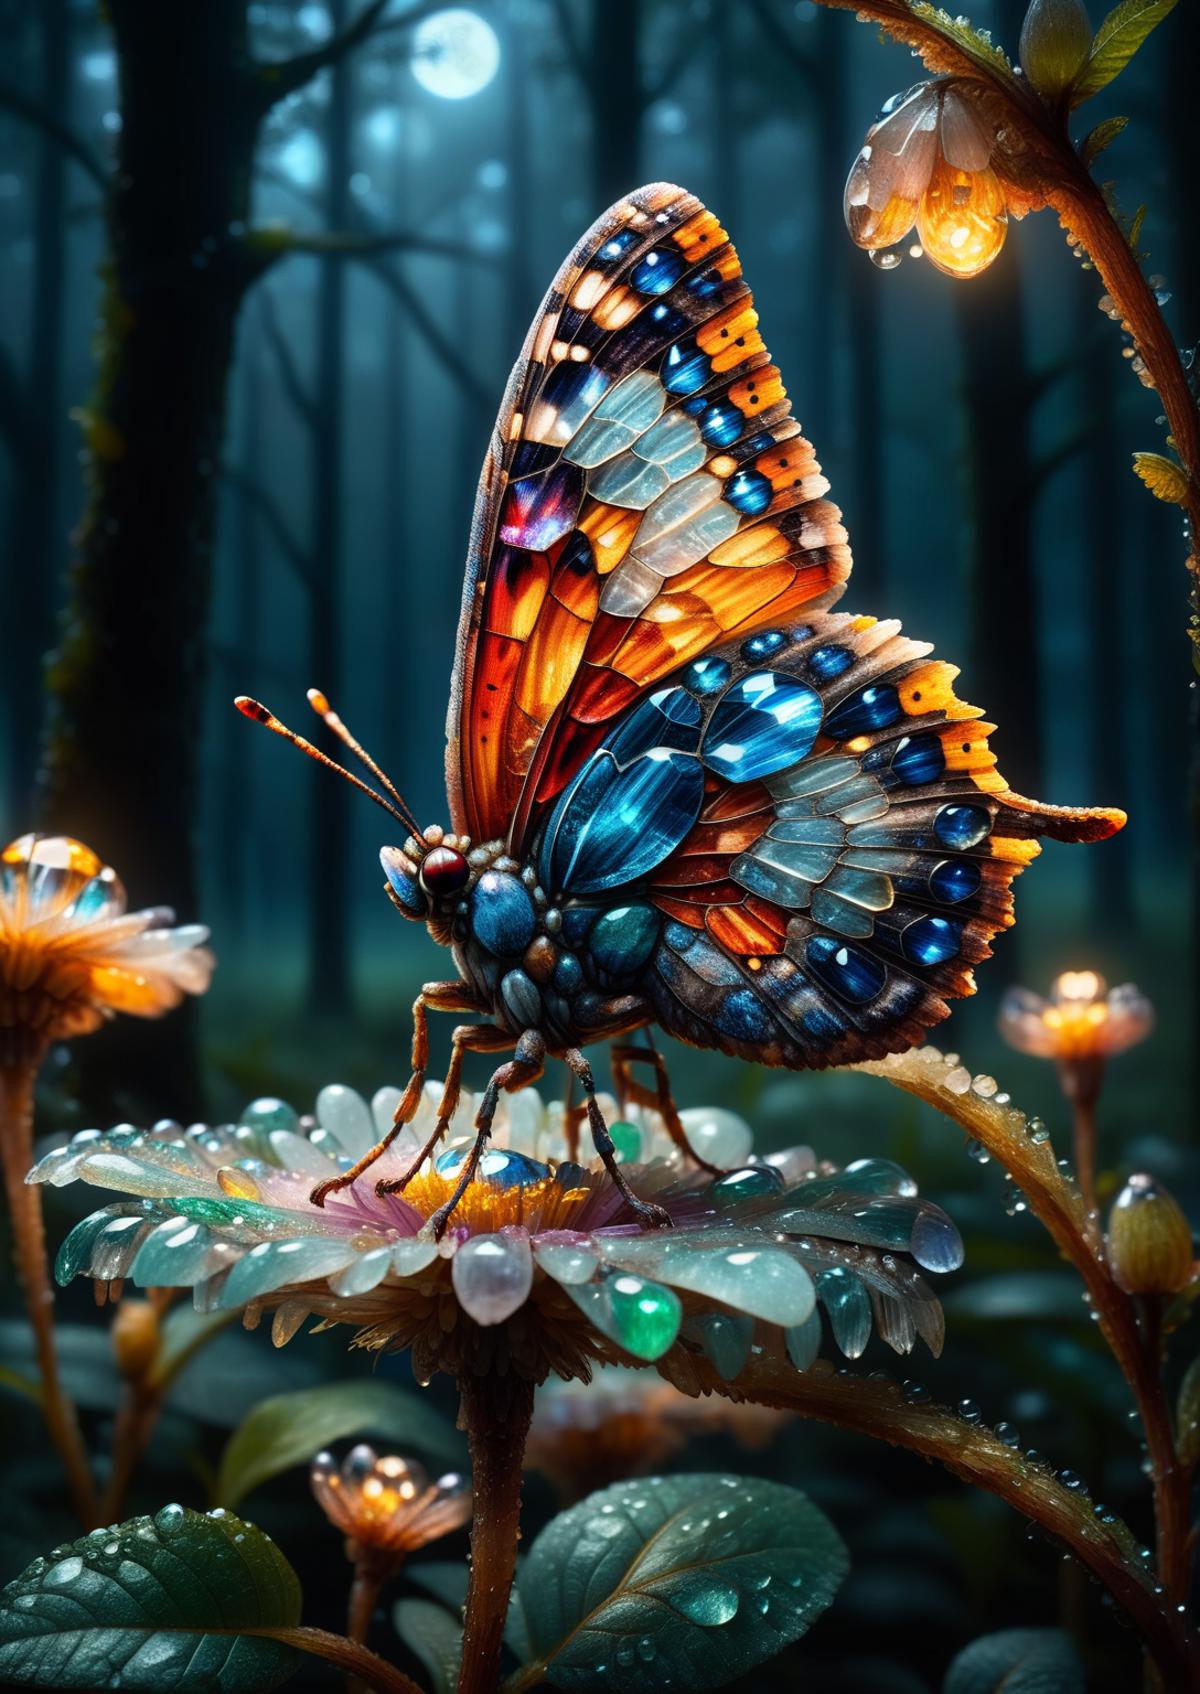 A Beautifully Decorated Butterfly Sits on a Flower in a Forest